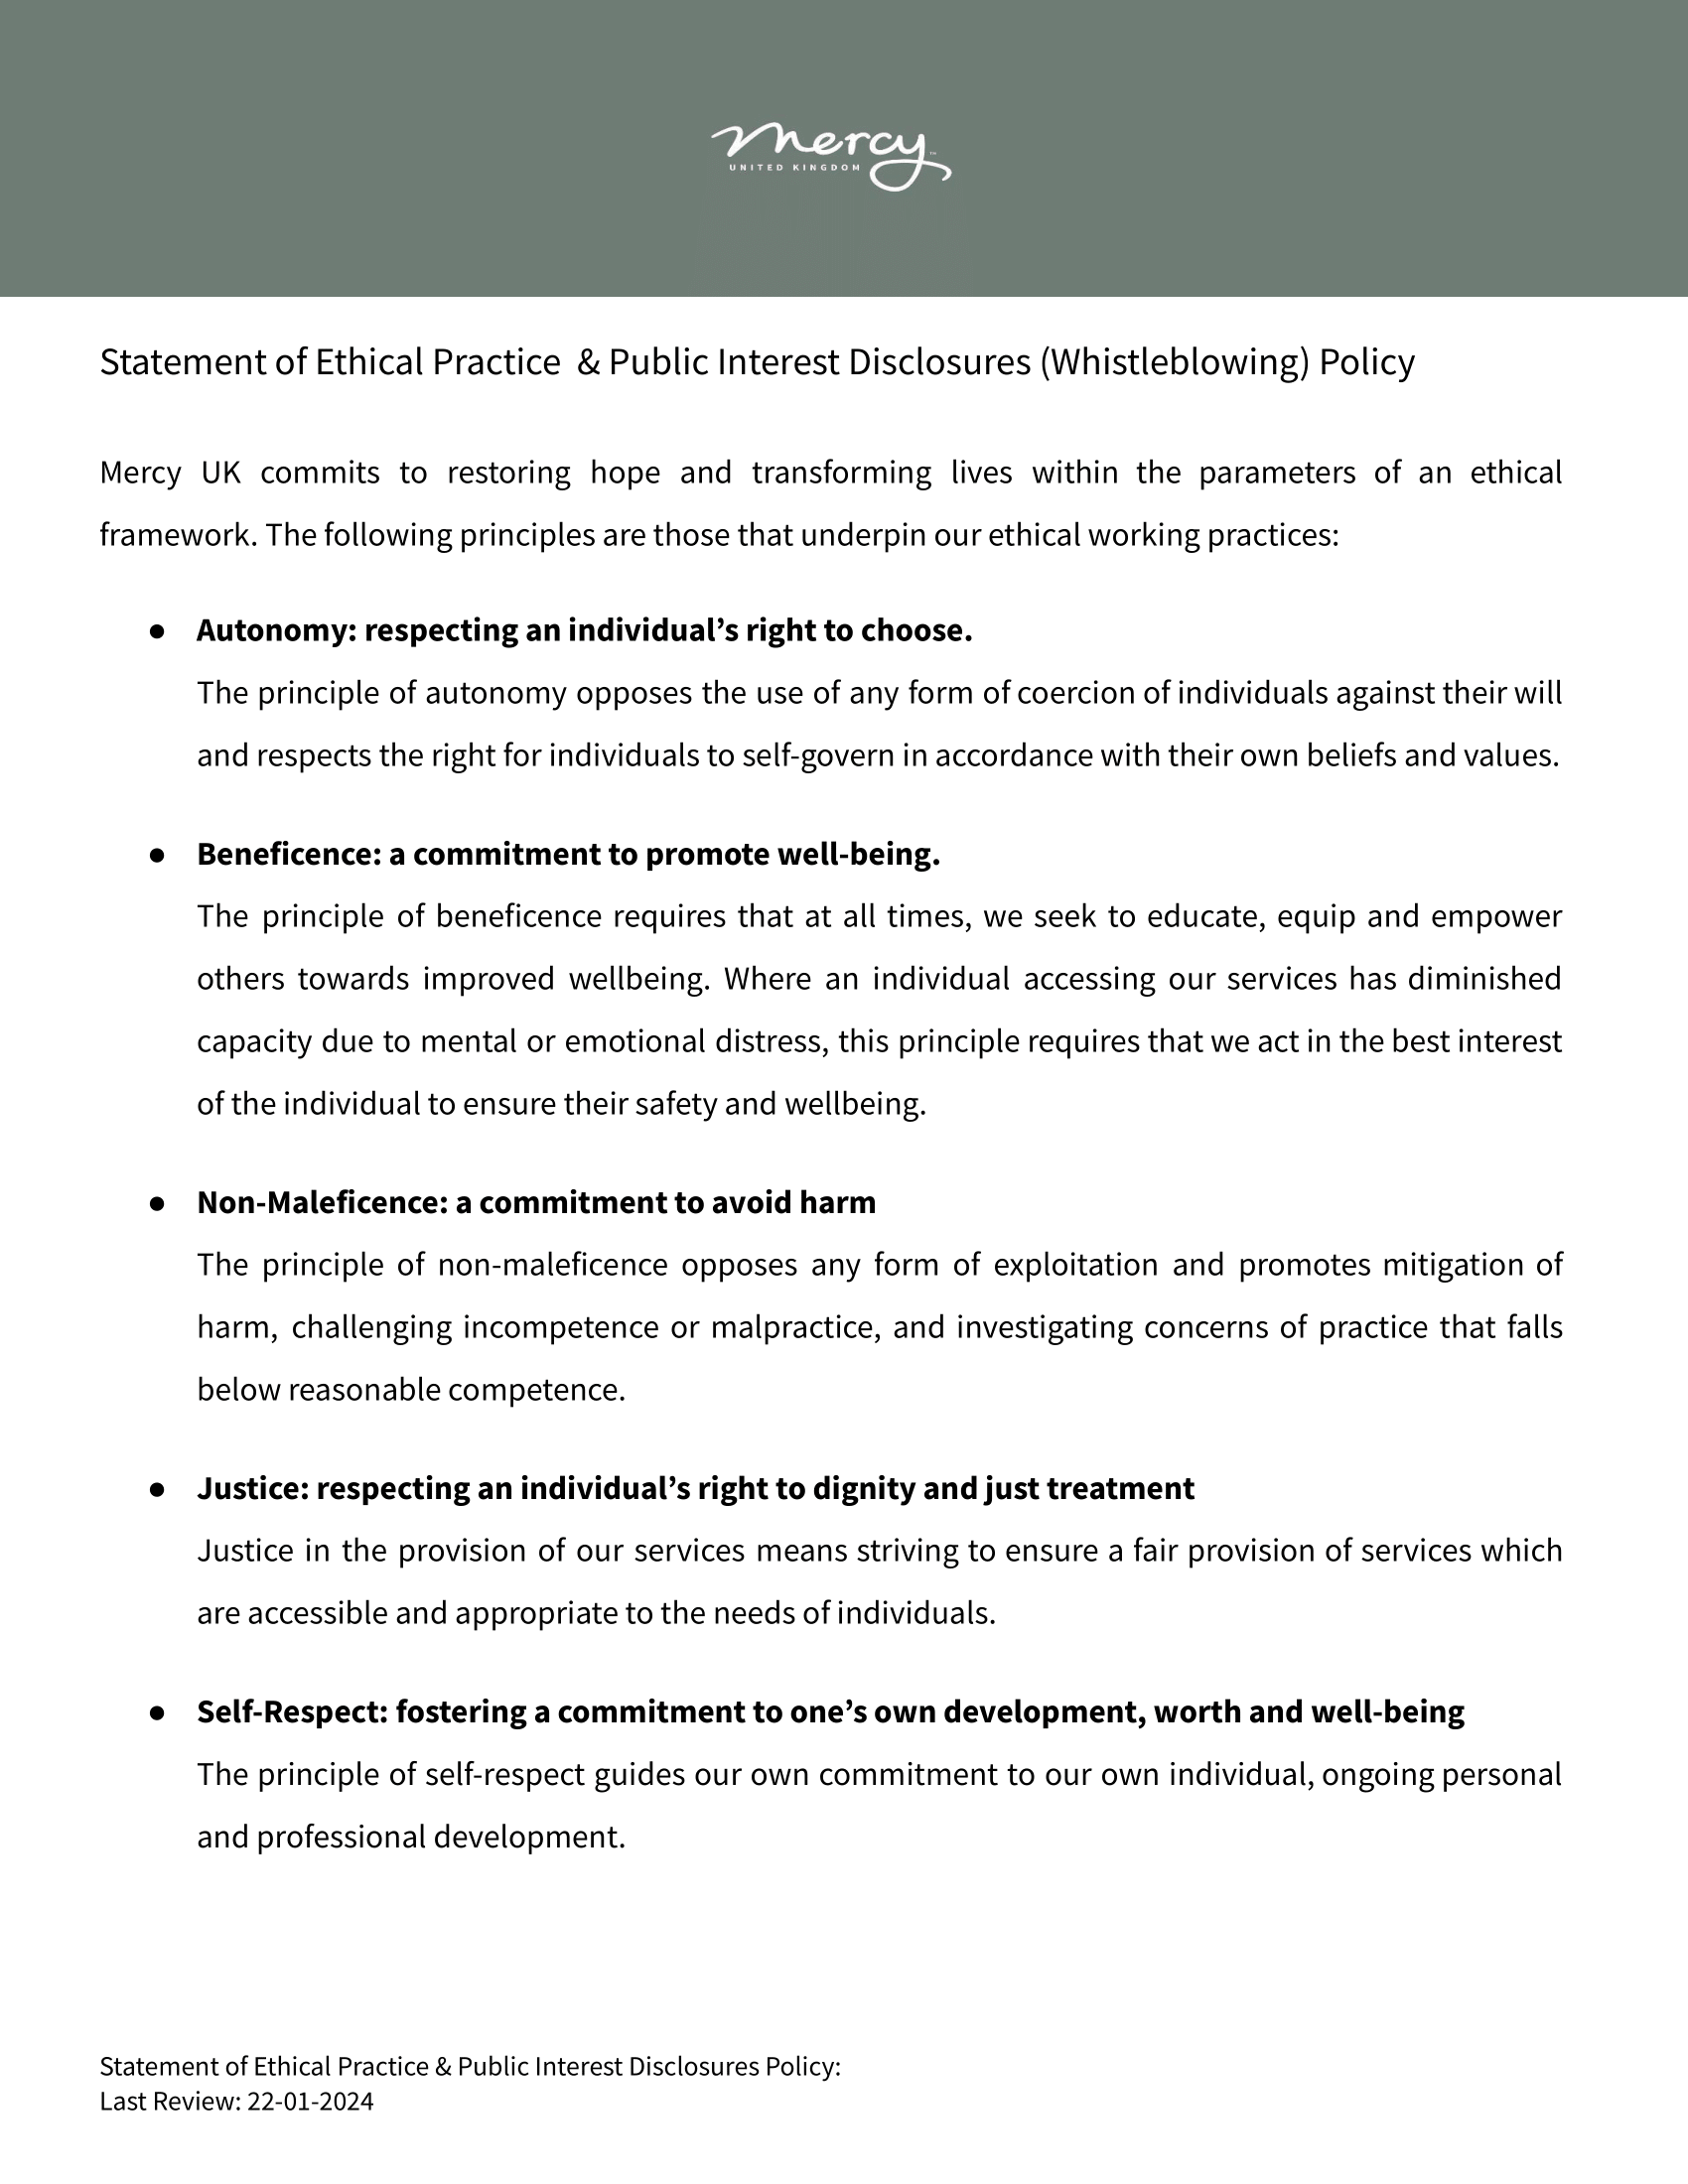 Statement of Ethical Practice & Public Interest Disclosures (Full) Policy revised 22-01-2024.docx-1.png